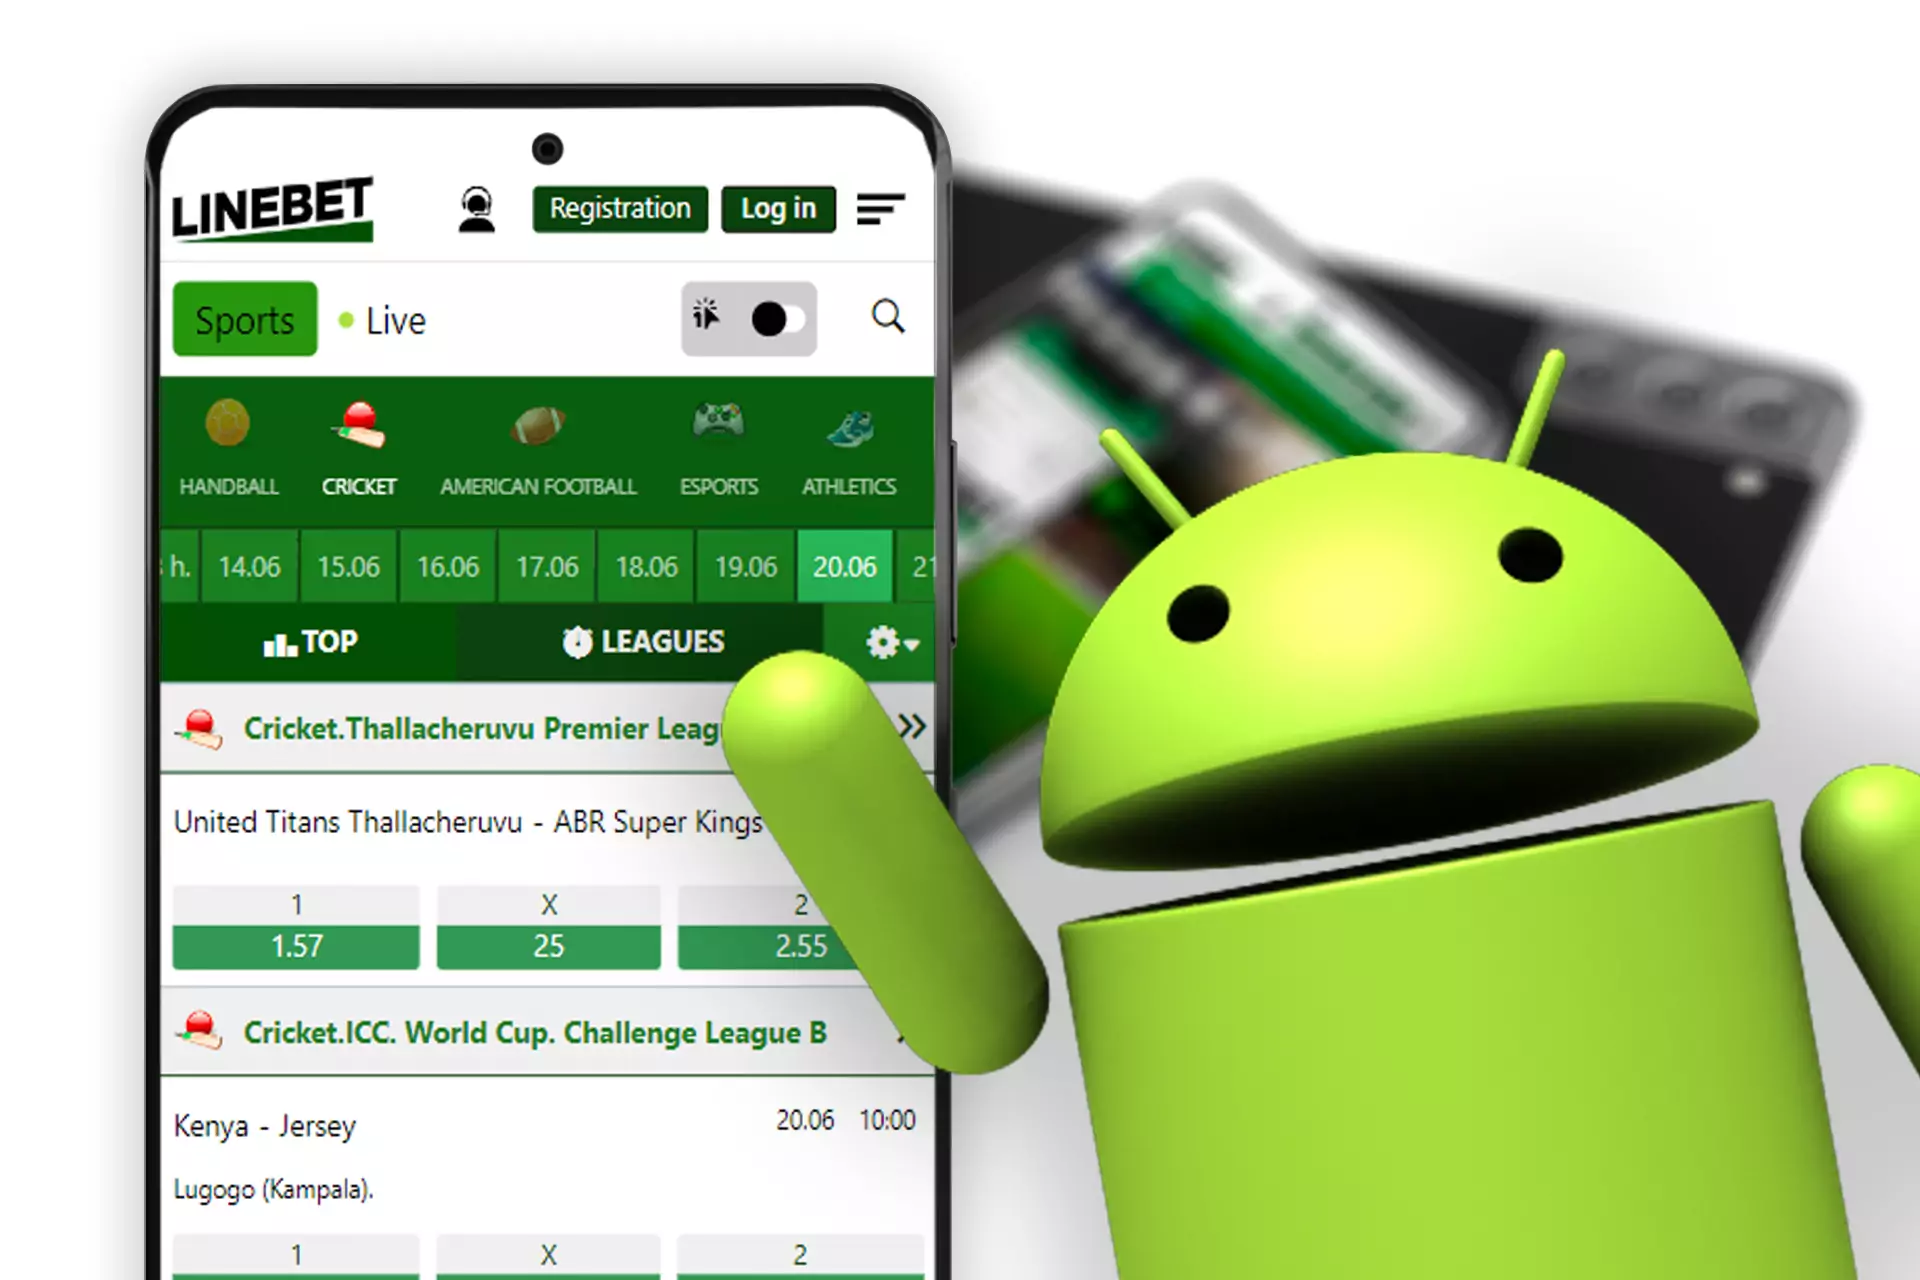 Smartphone users can place bets from the Android app.